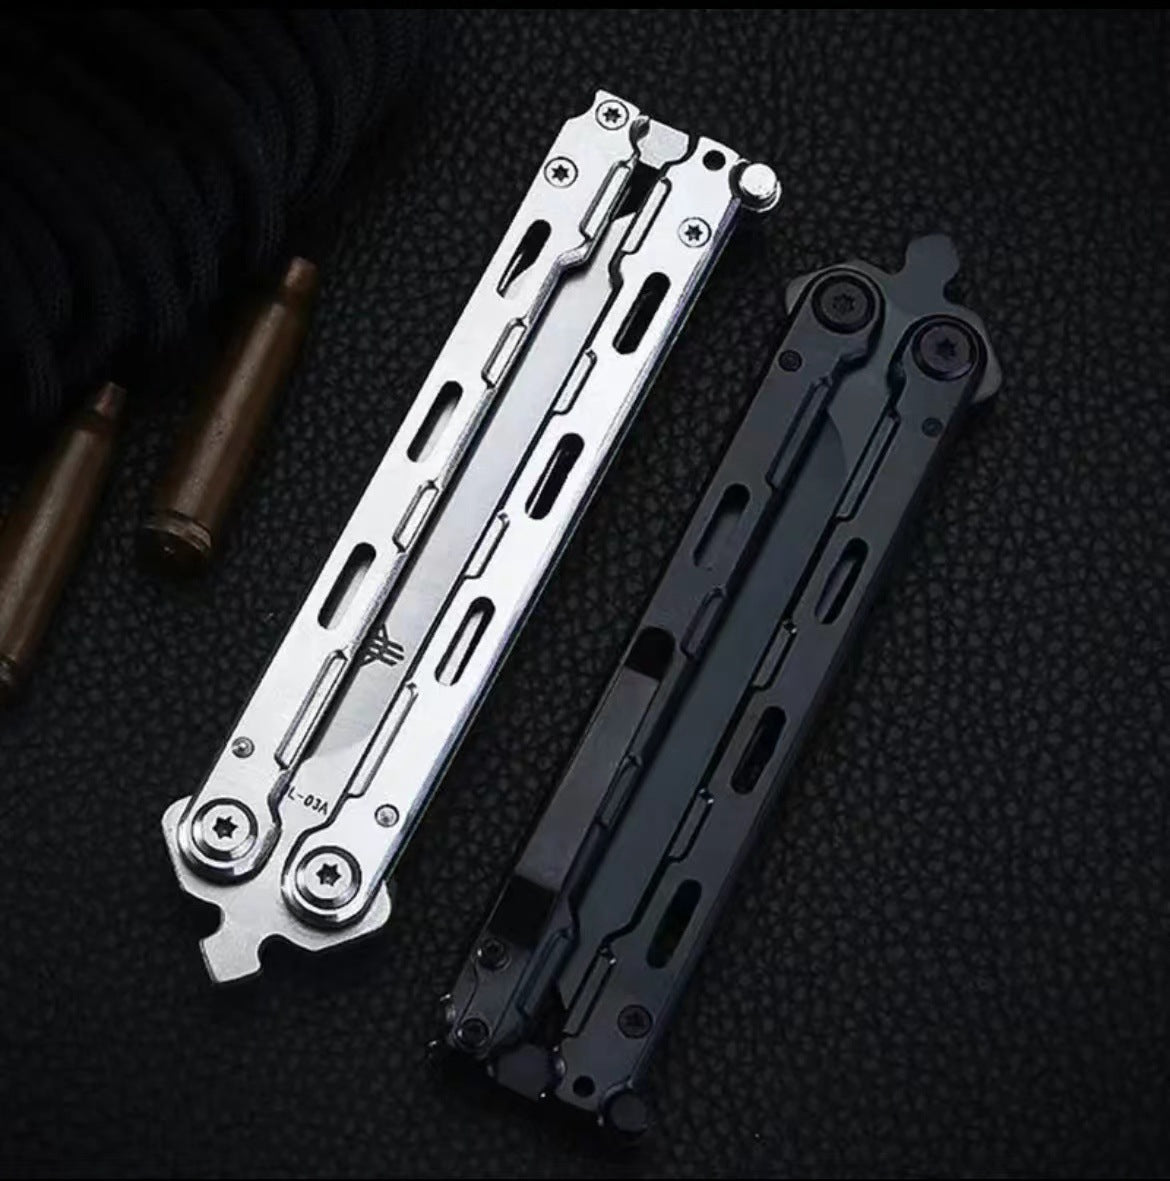 Butterfly folding knife csgo unopened stainless steel practice knife full fall safety Knives training claw